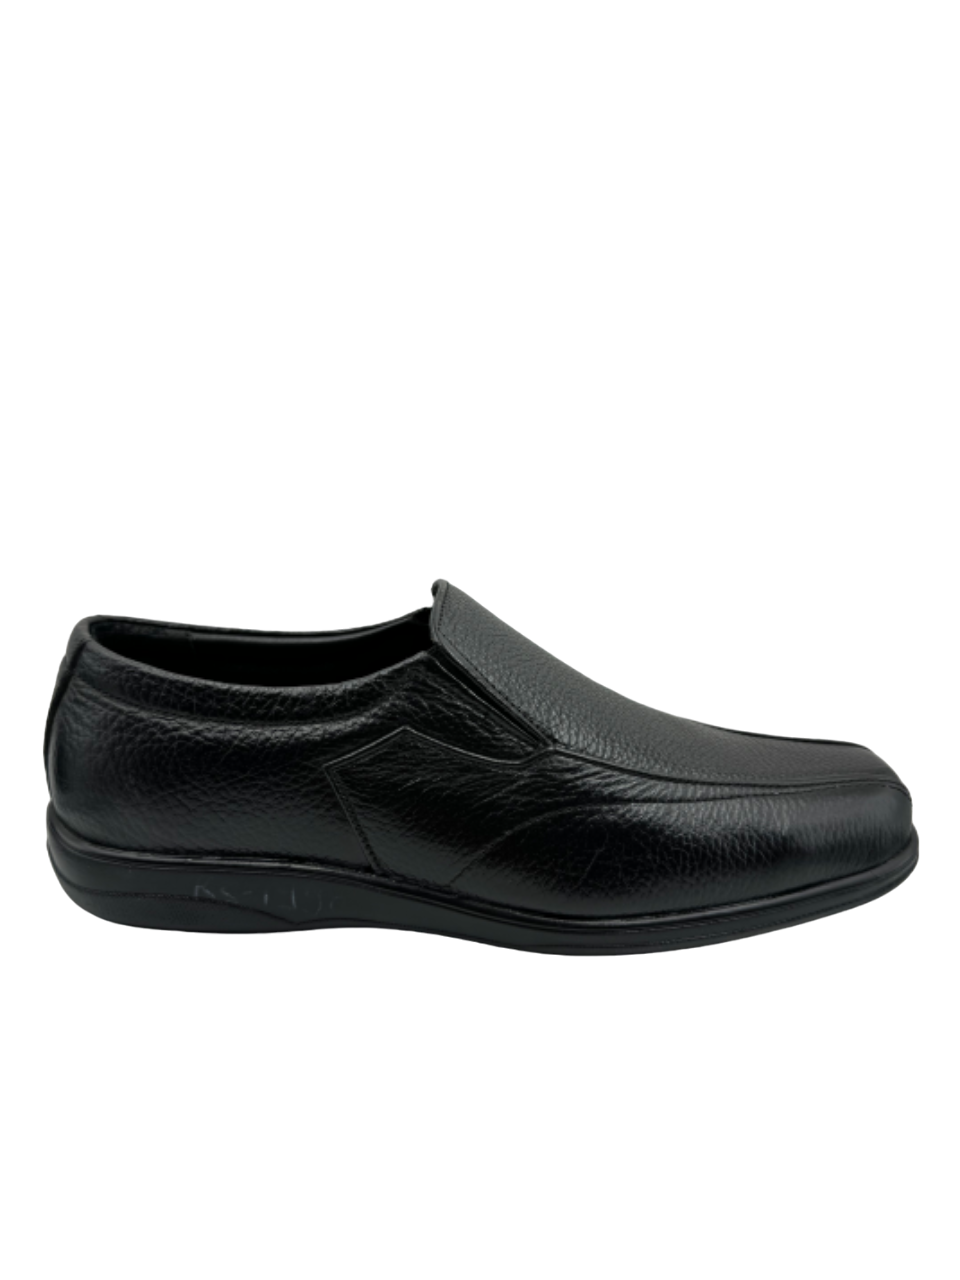 Ortho Soft Doctor Shoes GTSS 08